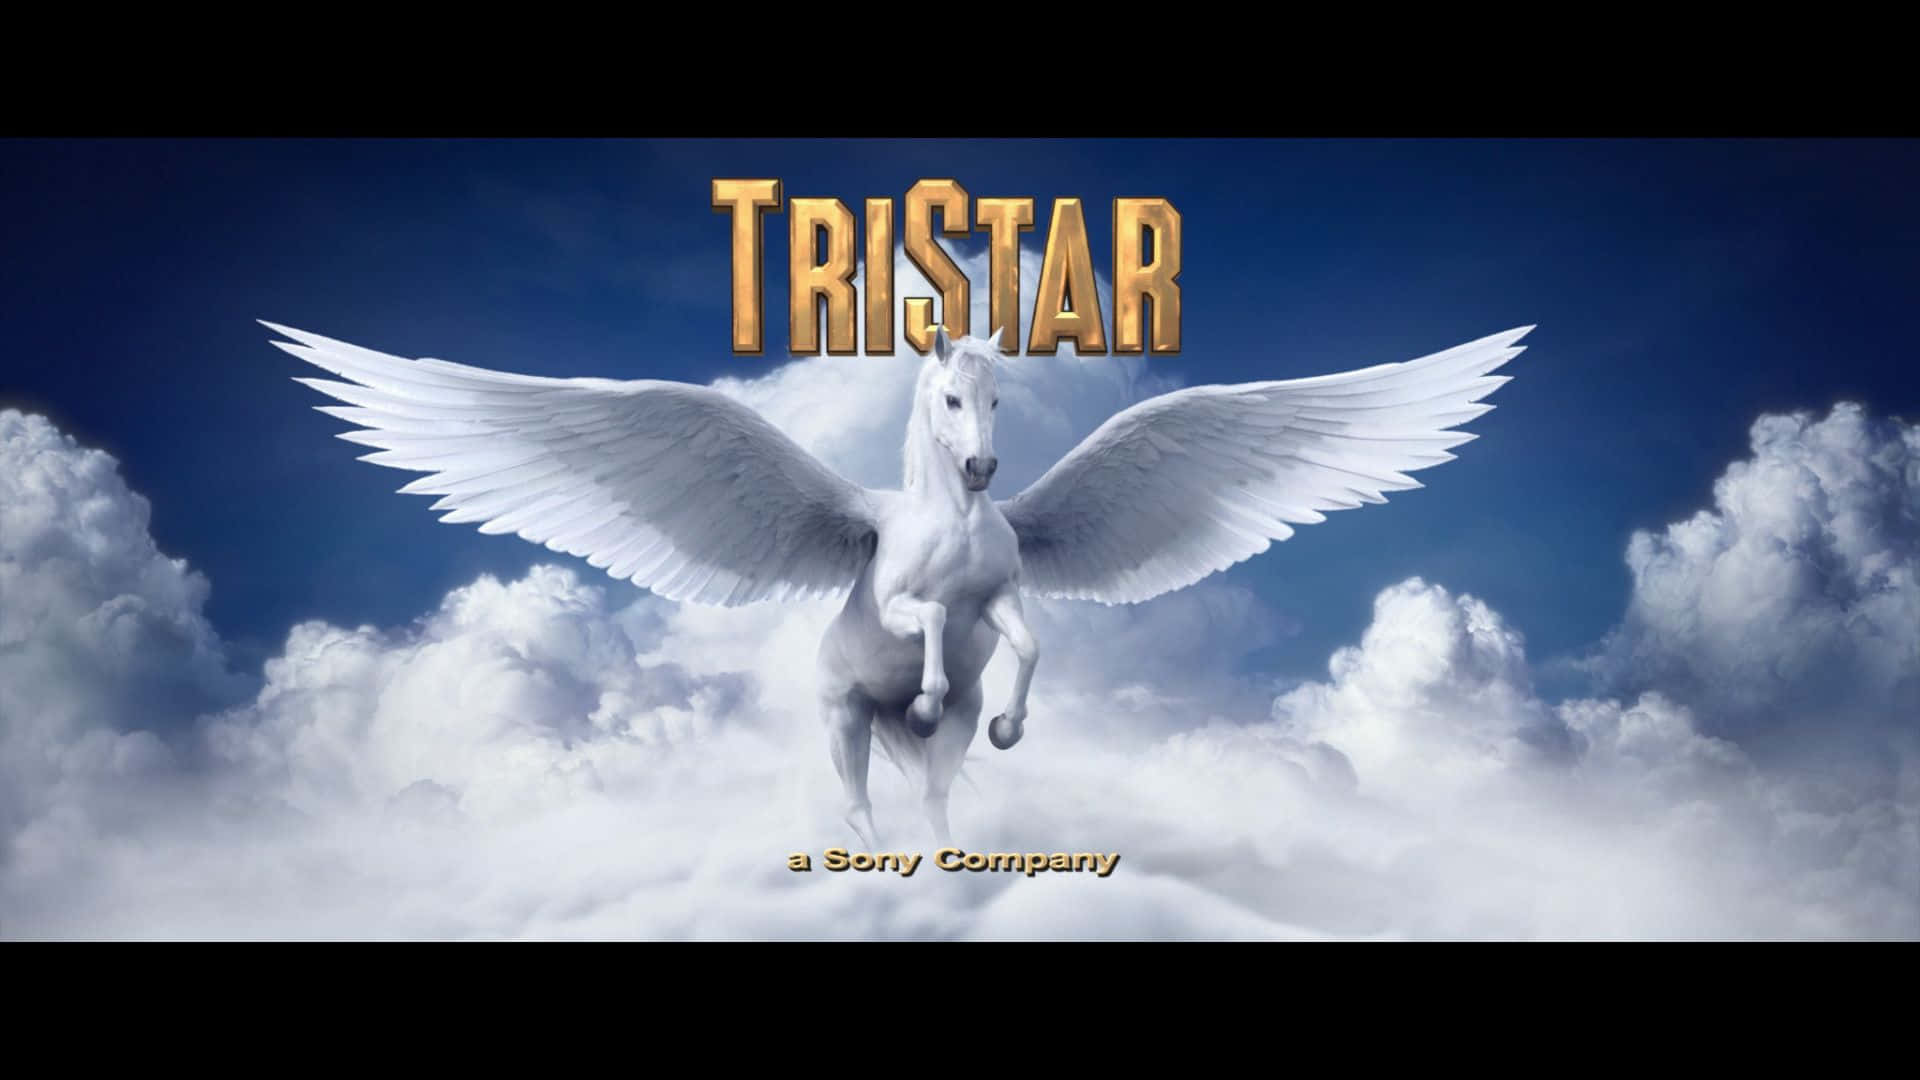 Tristar Horse In Blue Sky Picture